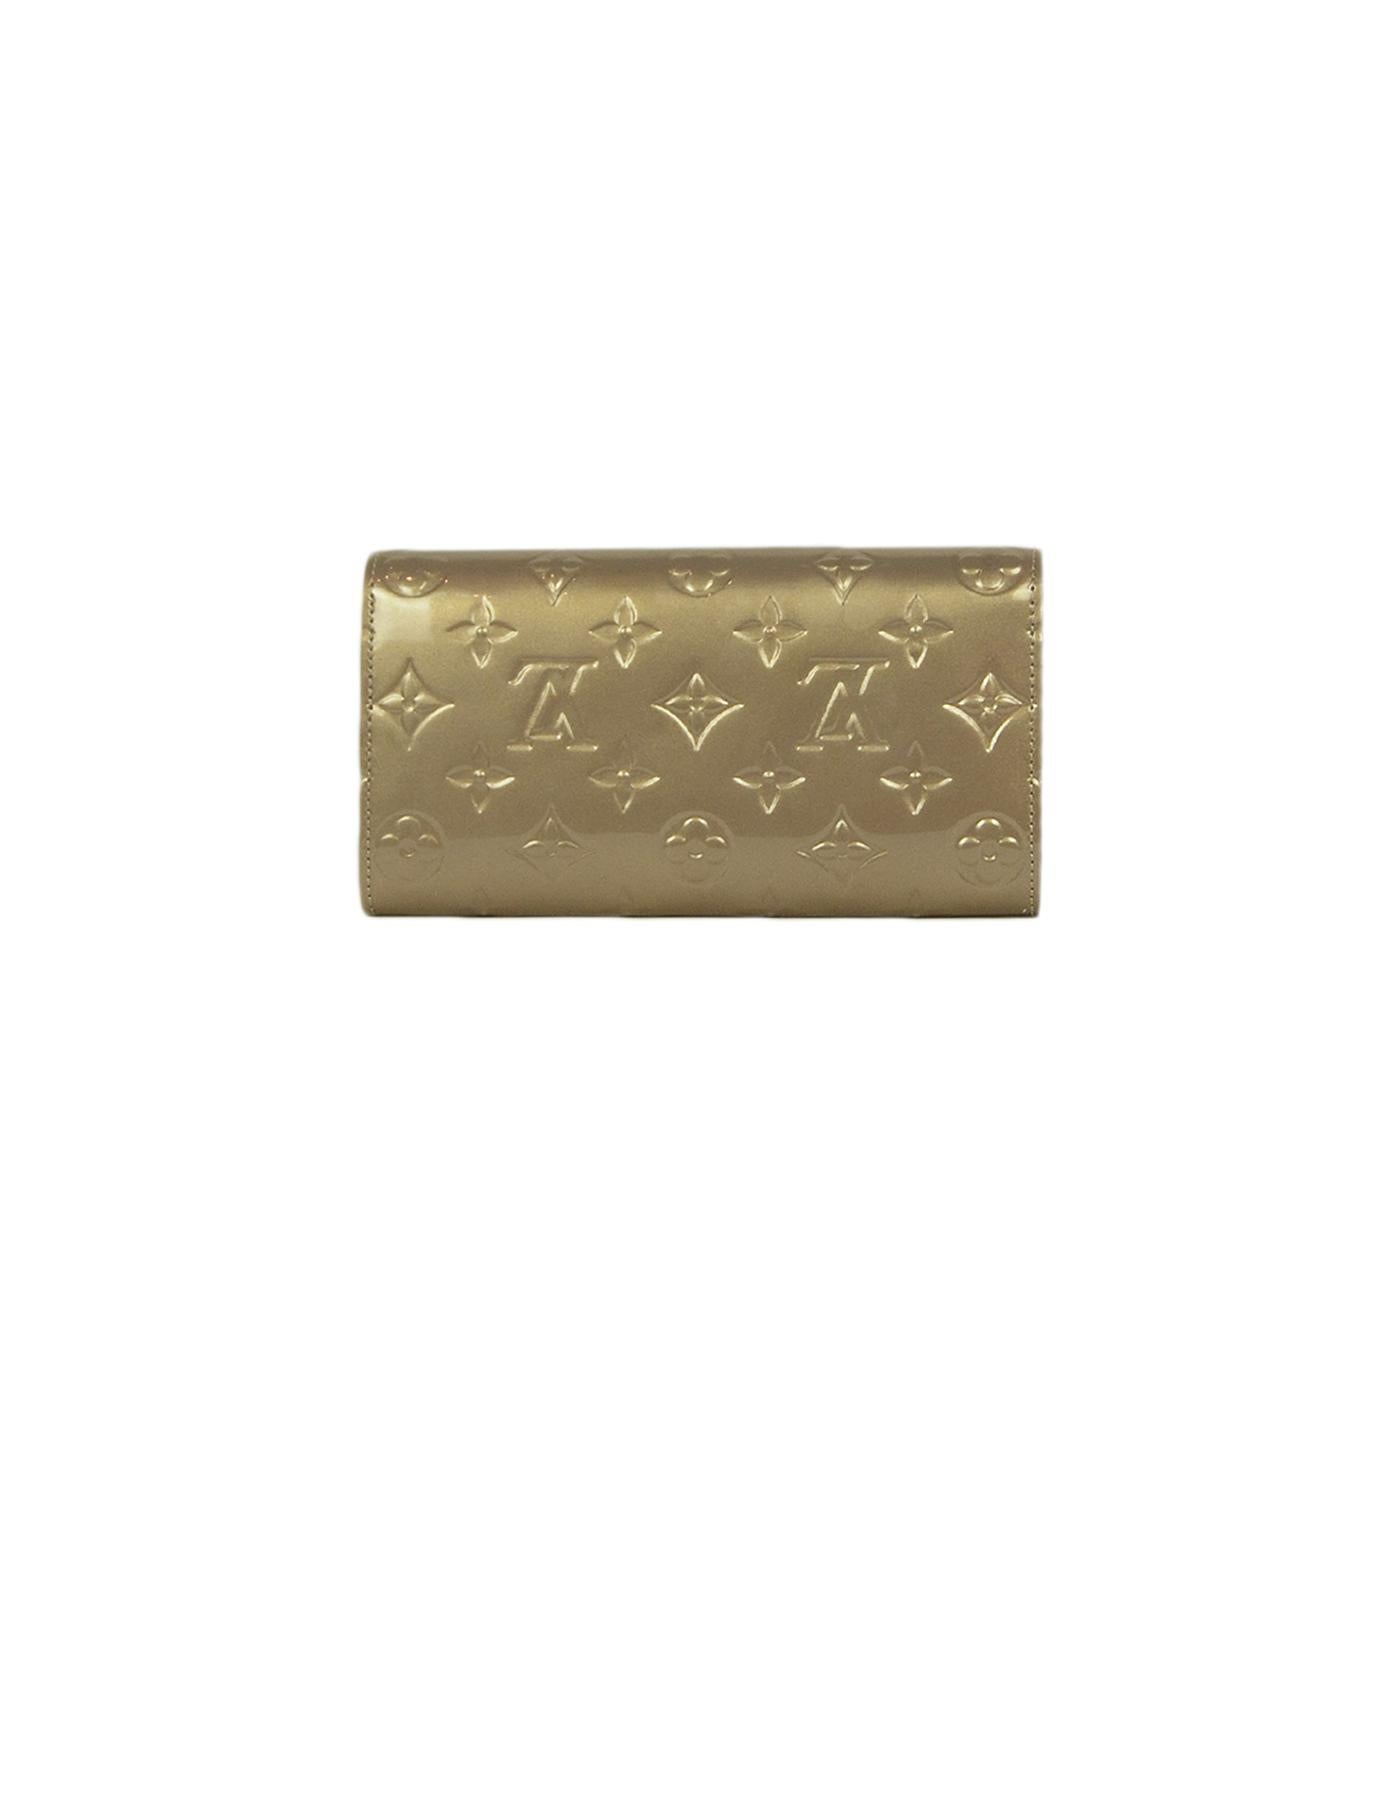 Louis Vuitton Beige Poudre Monogram Vernis Sarah Wallet

Made In: France
Year of Production: 2012
Color: Beige Poudre
Hardware: Goldtone 
Materials: Vernis Leather
Lining: Leather
Closure/Opening: Top flap with snap
Exterior Pockets: None
Interior